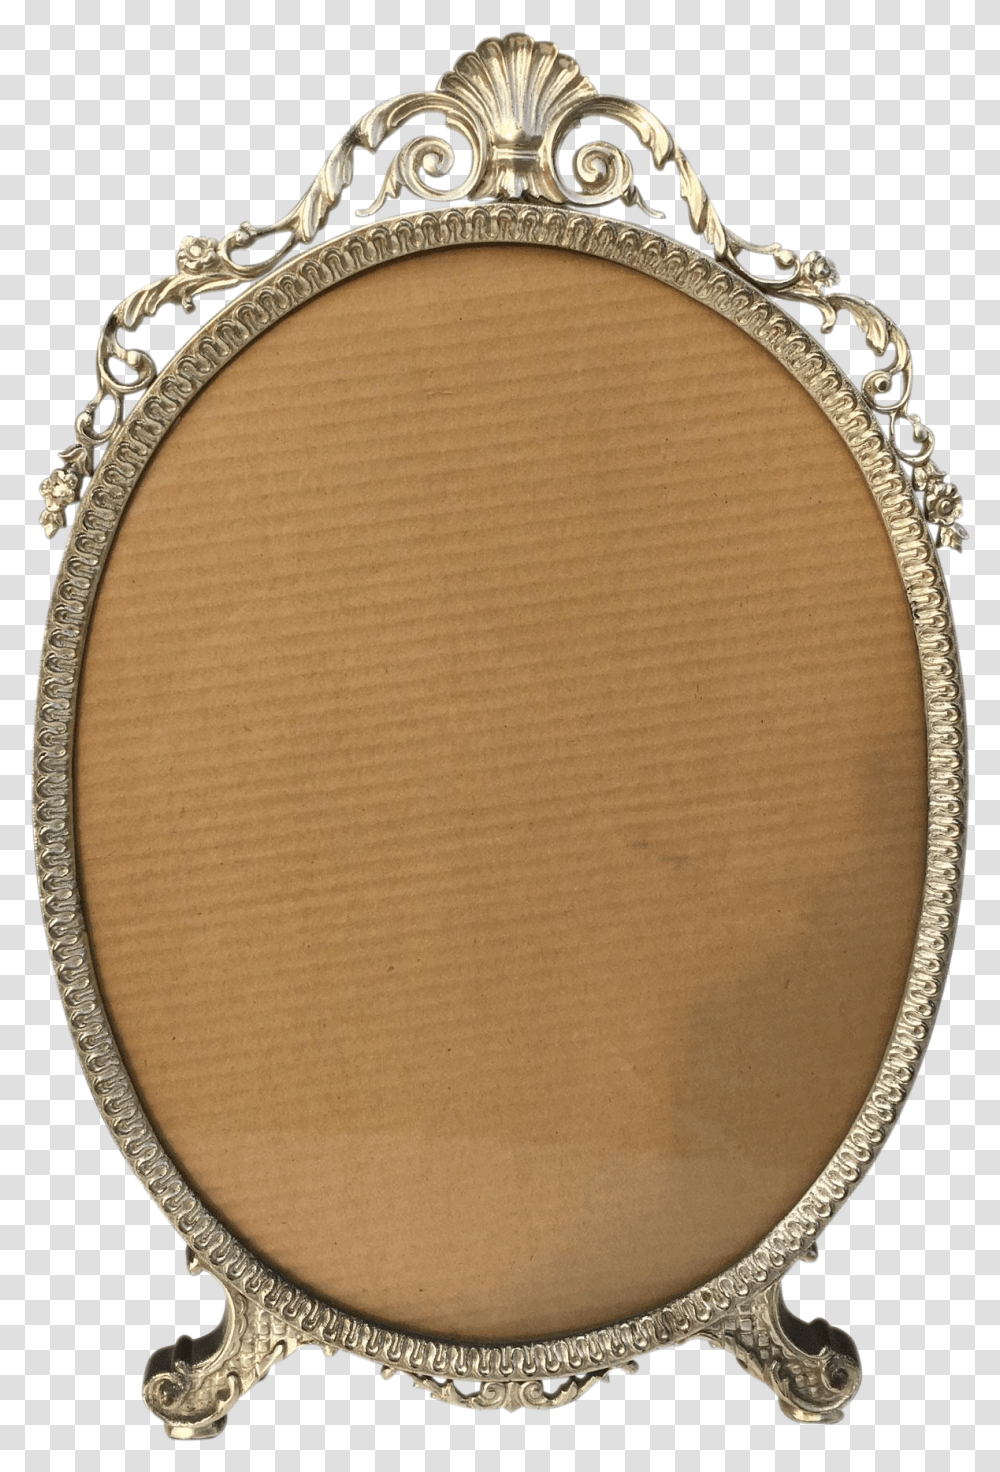 Image Of 2020 Trend Report Antique Oval Picture Frames, Rug, Necklace, Jewelry, Accessories Transparent Png